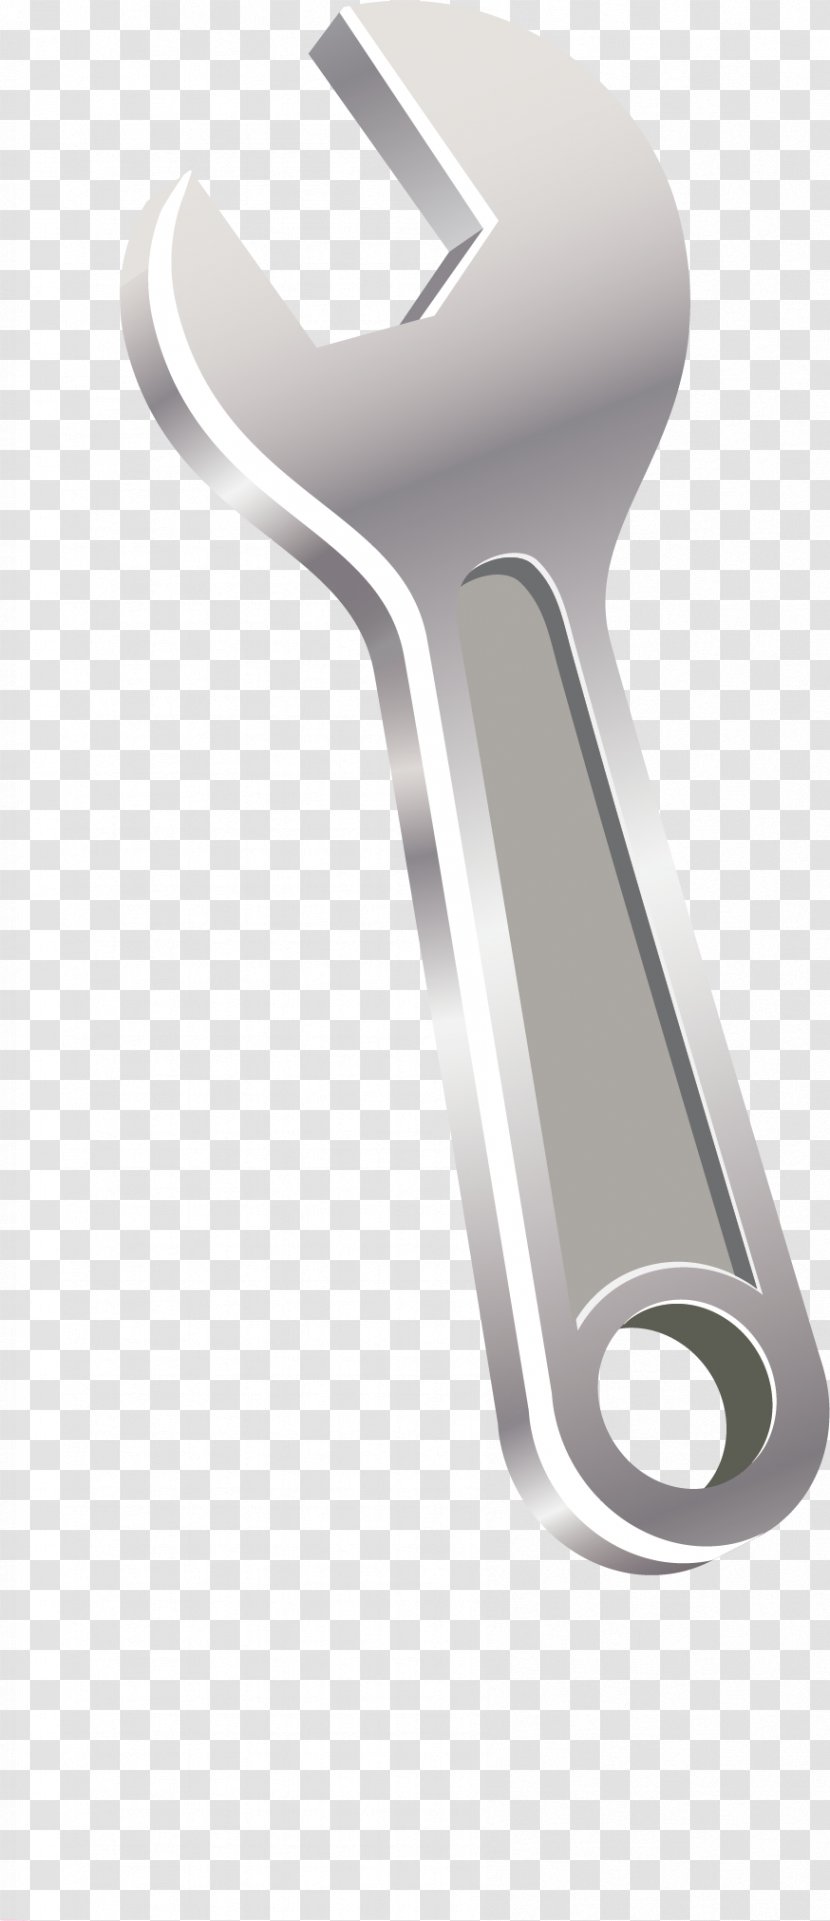 Wrench Adobe Illustrator - Hardware Accessory - Vector Material Transparent PNG